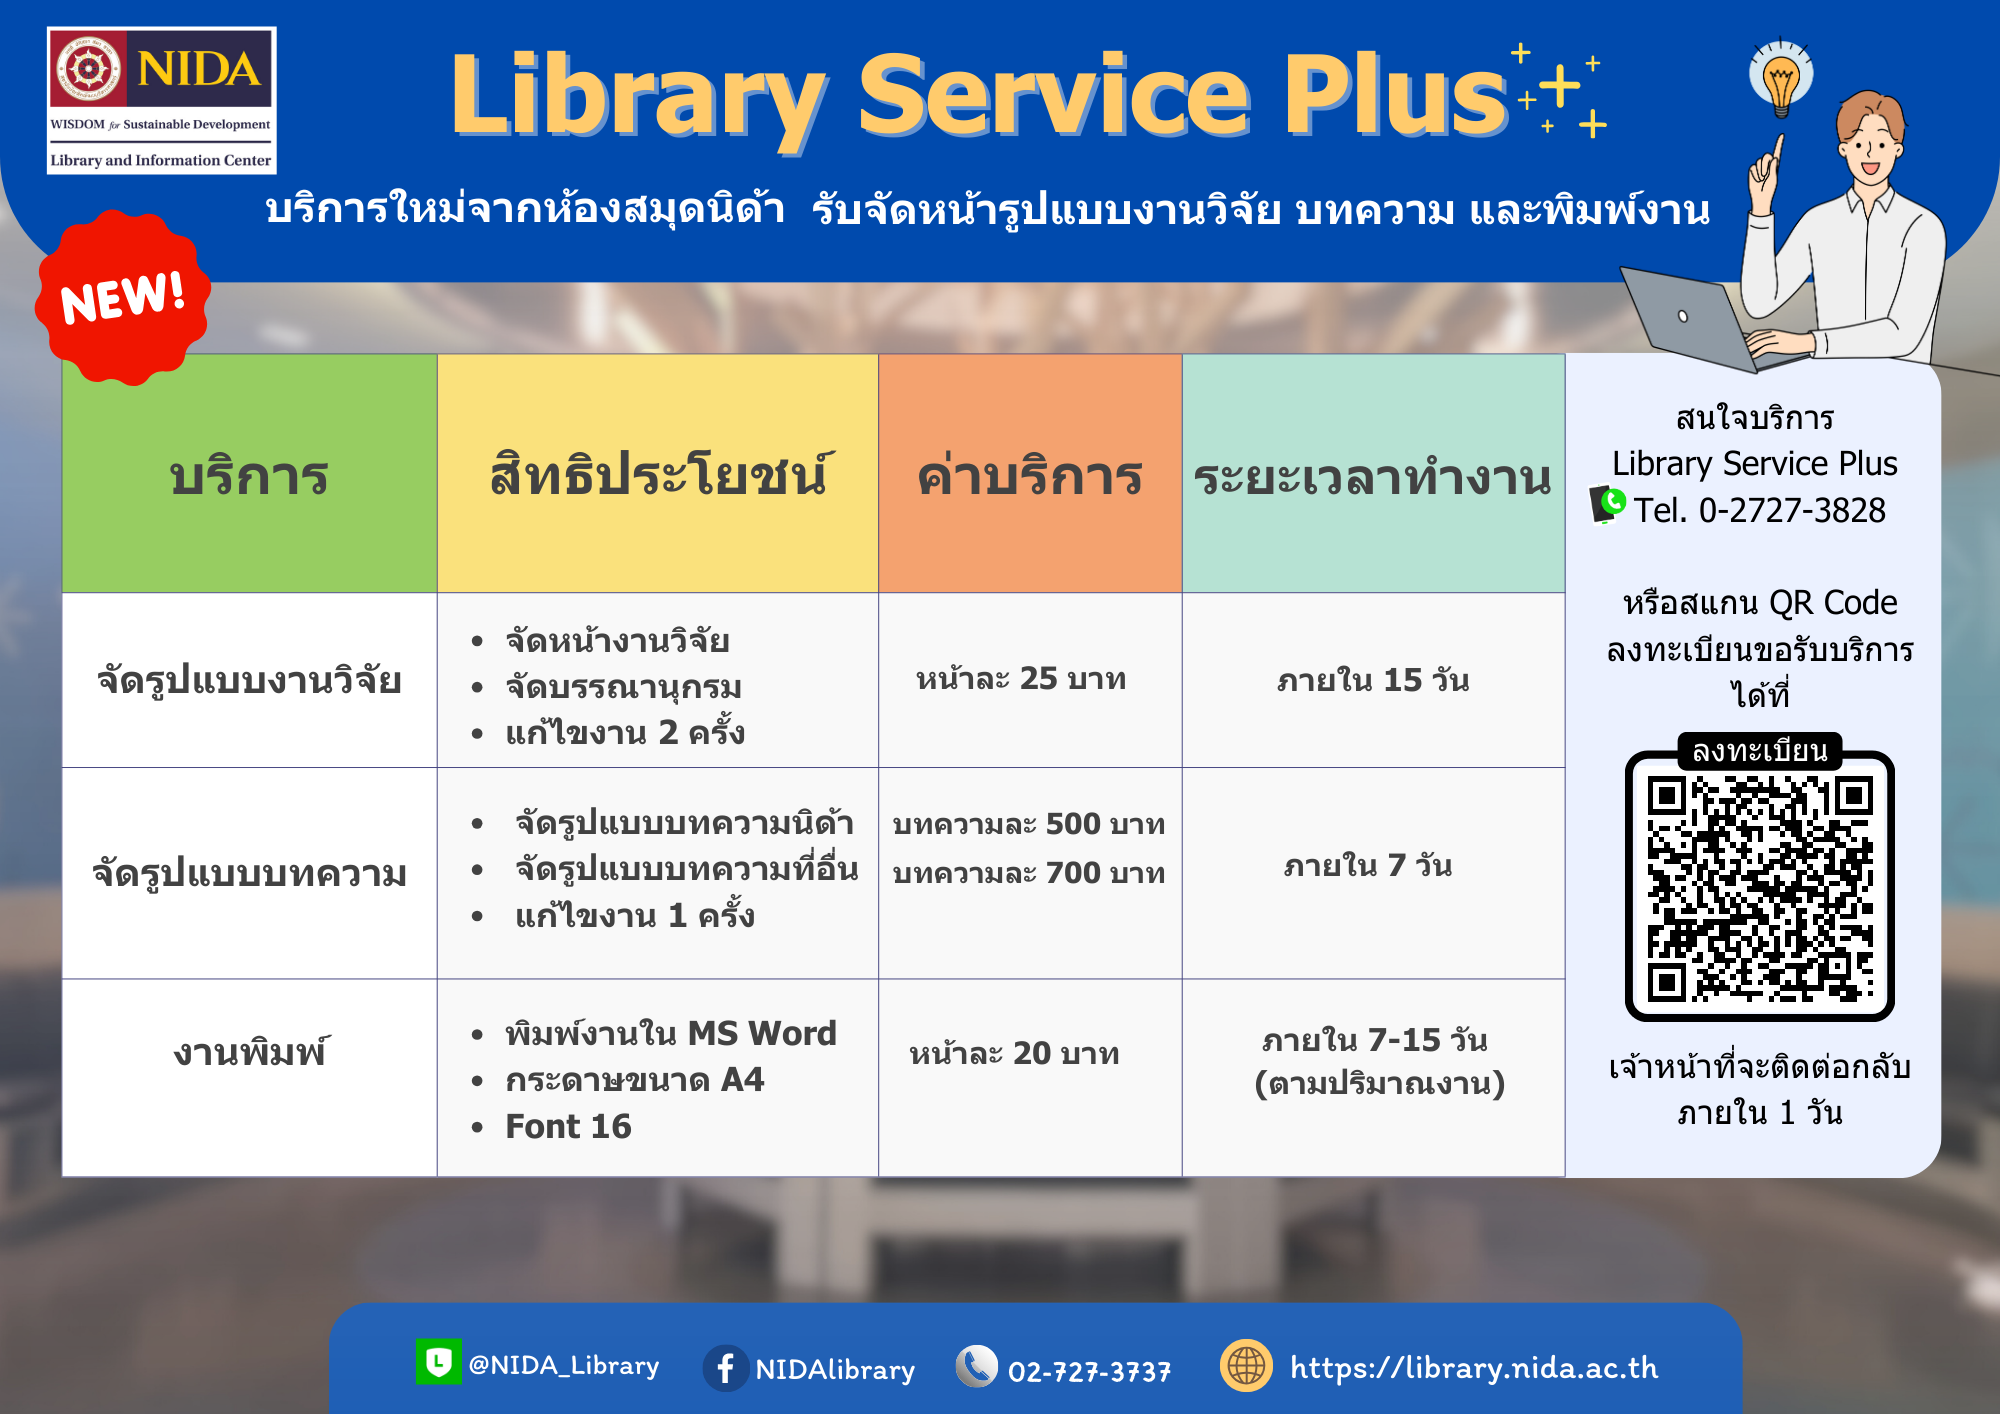 Library Service Plus+ Update